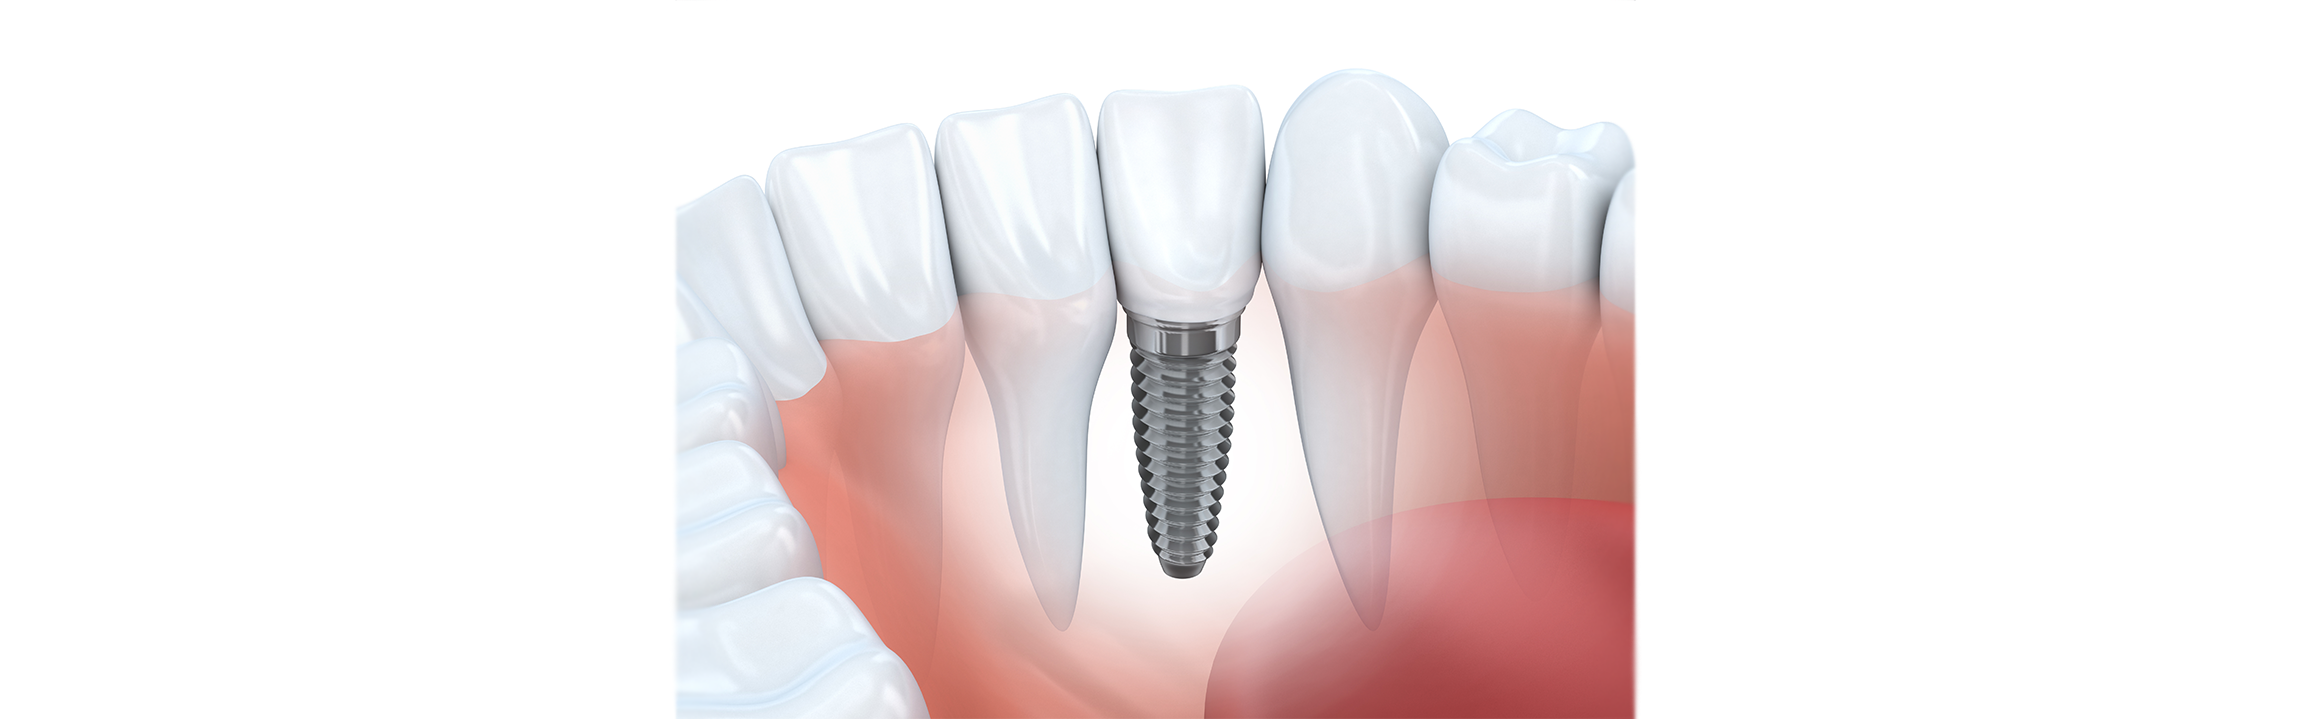 Will Your Dental Implants Change Over Time?